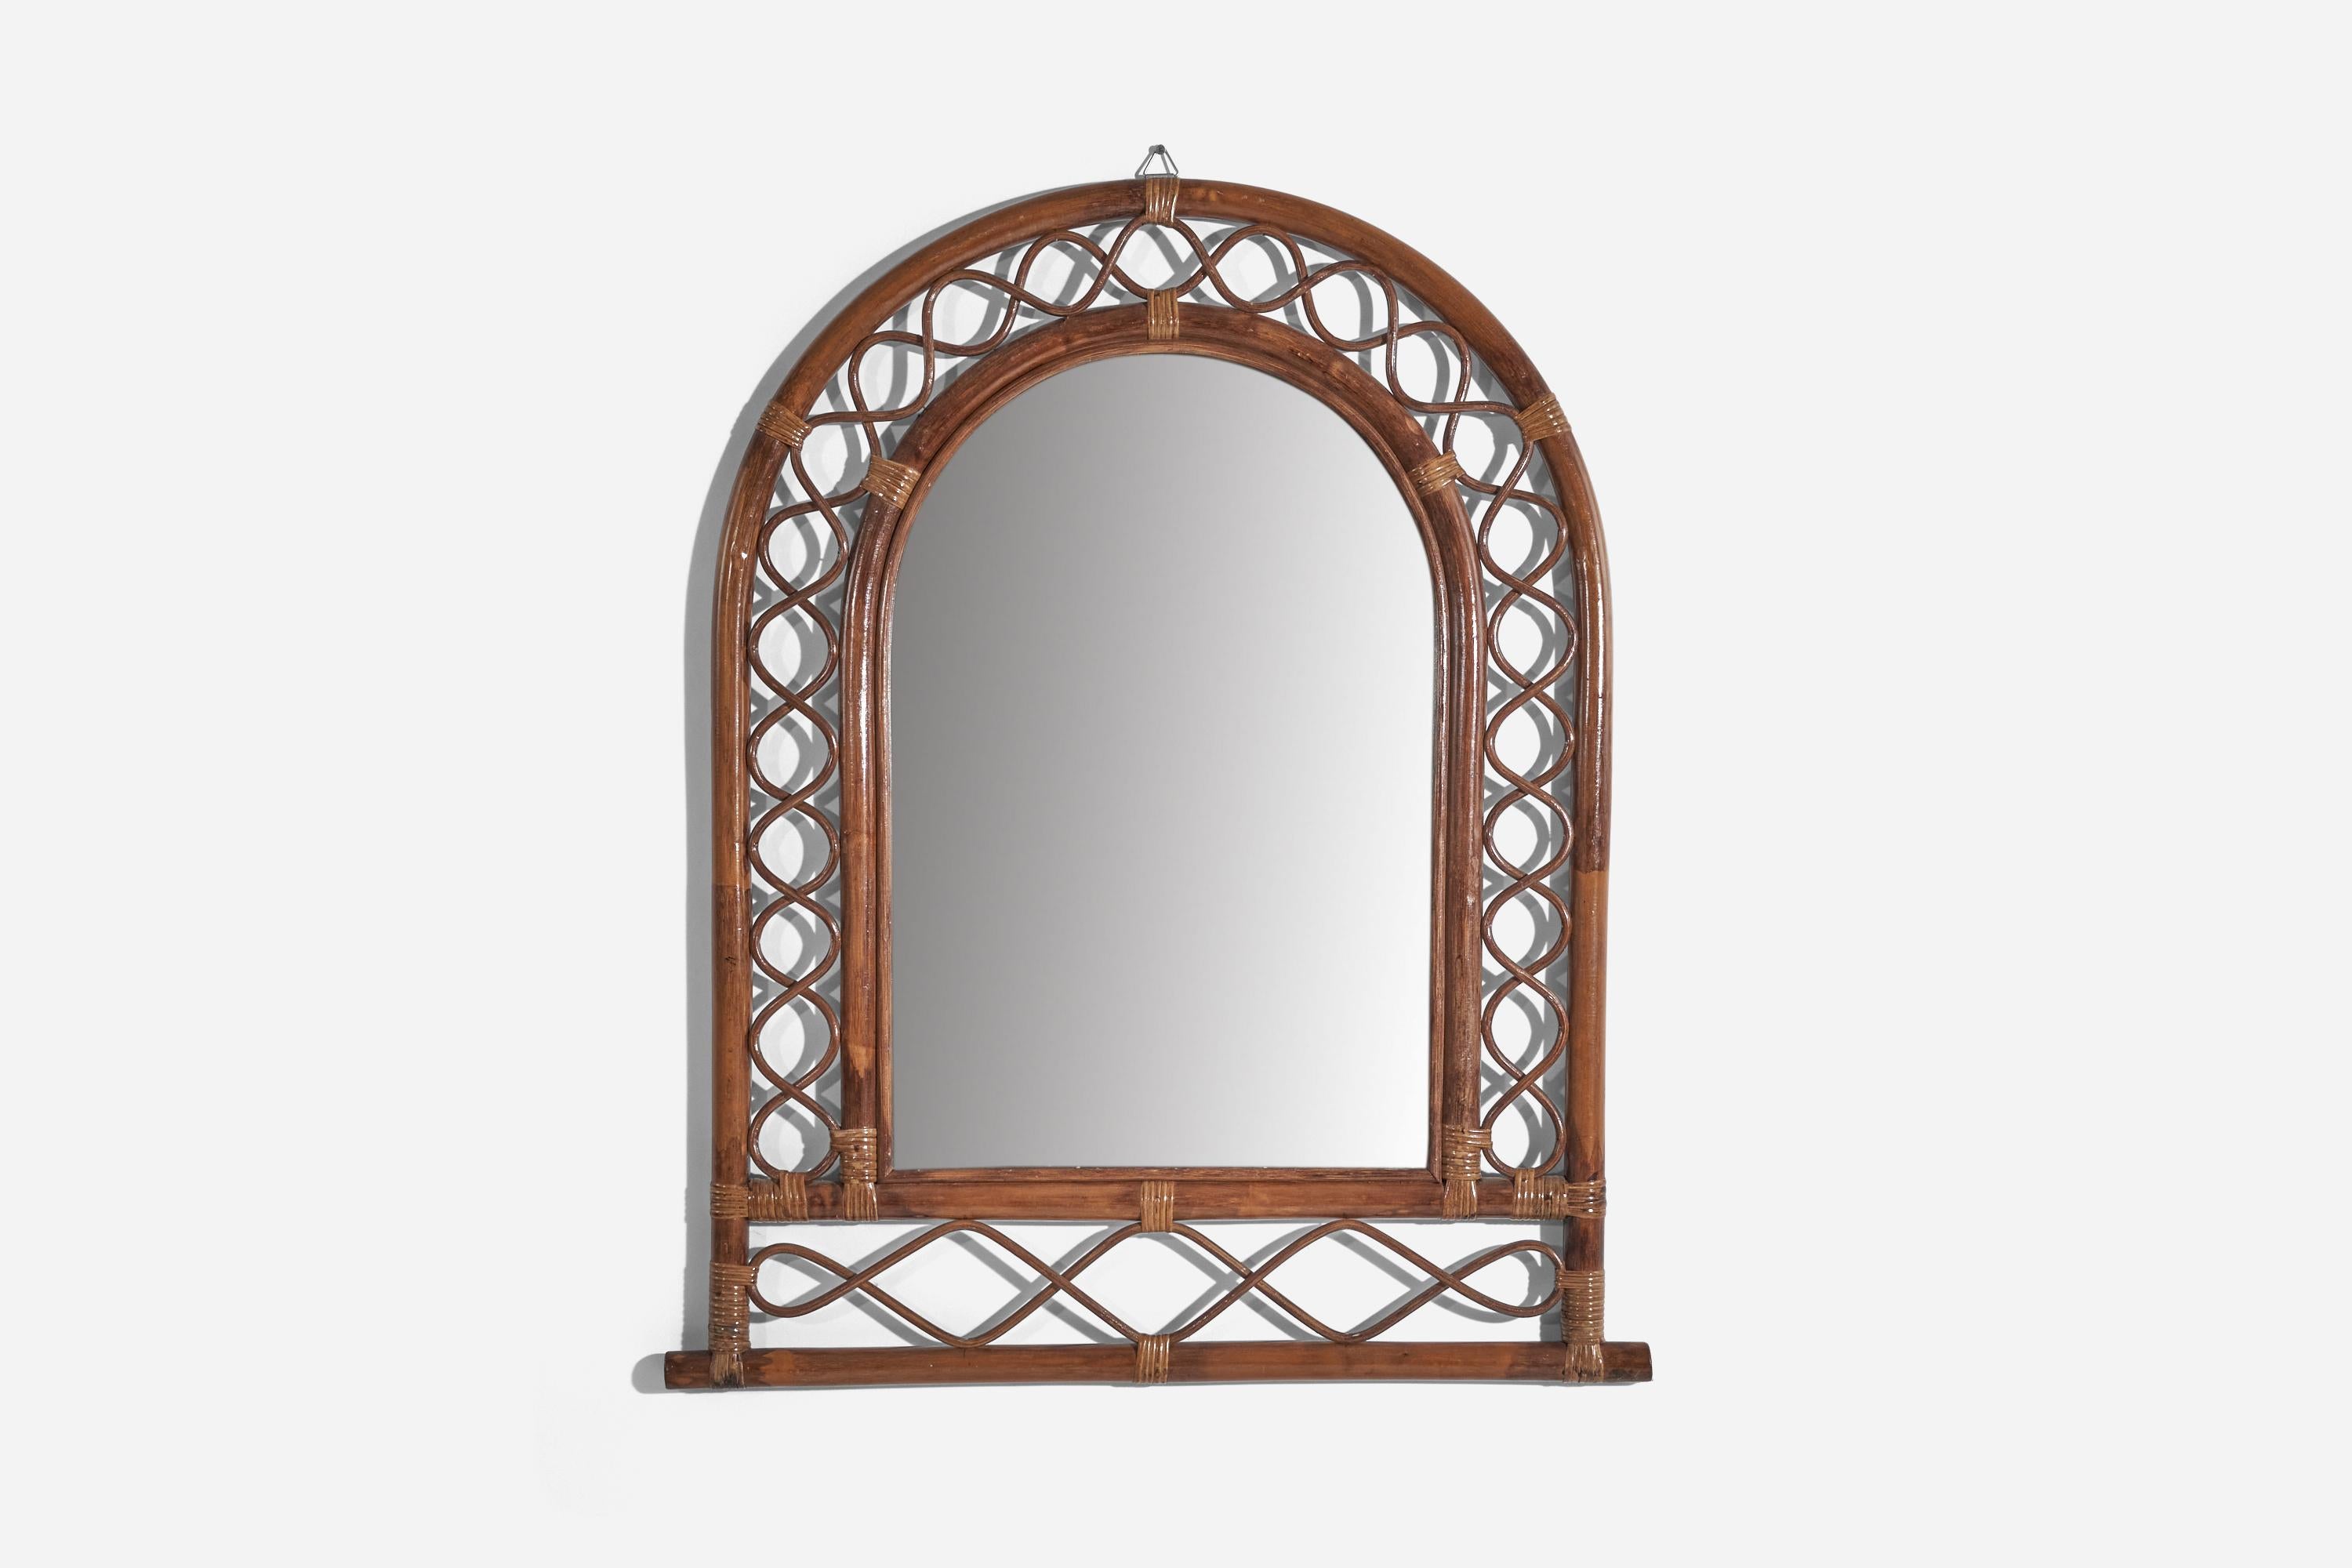 A rattan and bamboo wall mirror designed and produced by an Italian designer, Italy, 1950s-1960s.
    